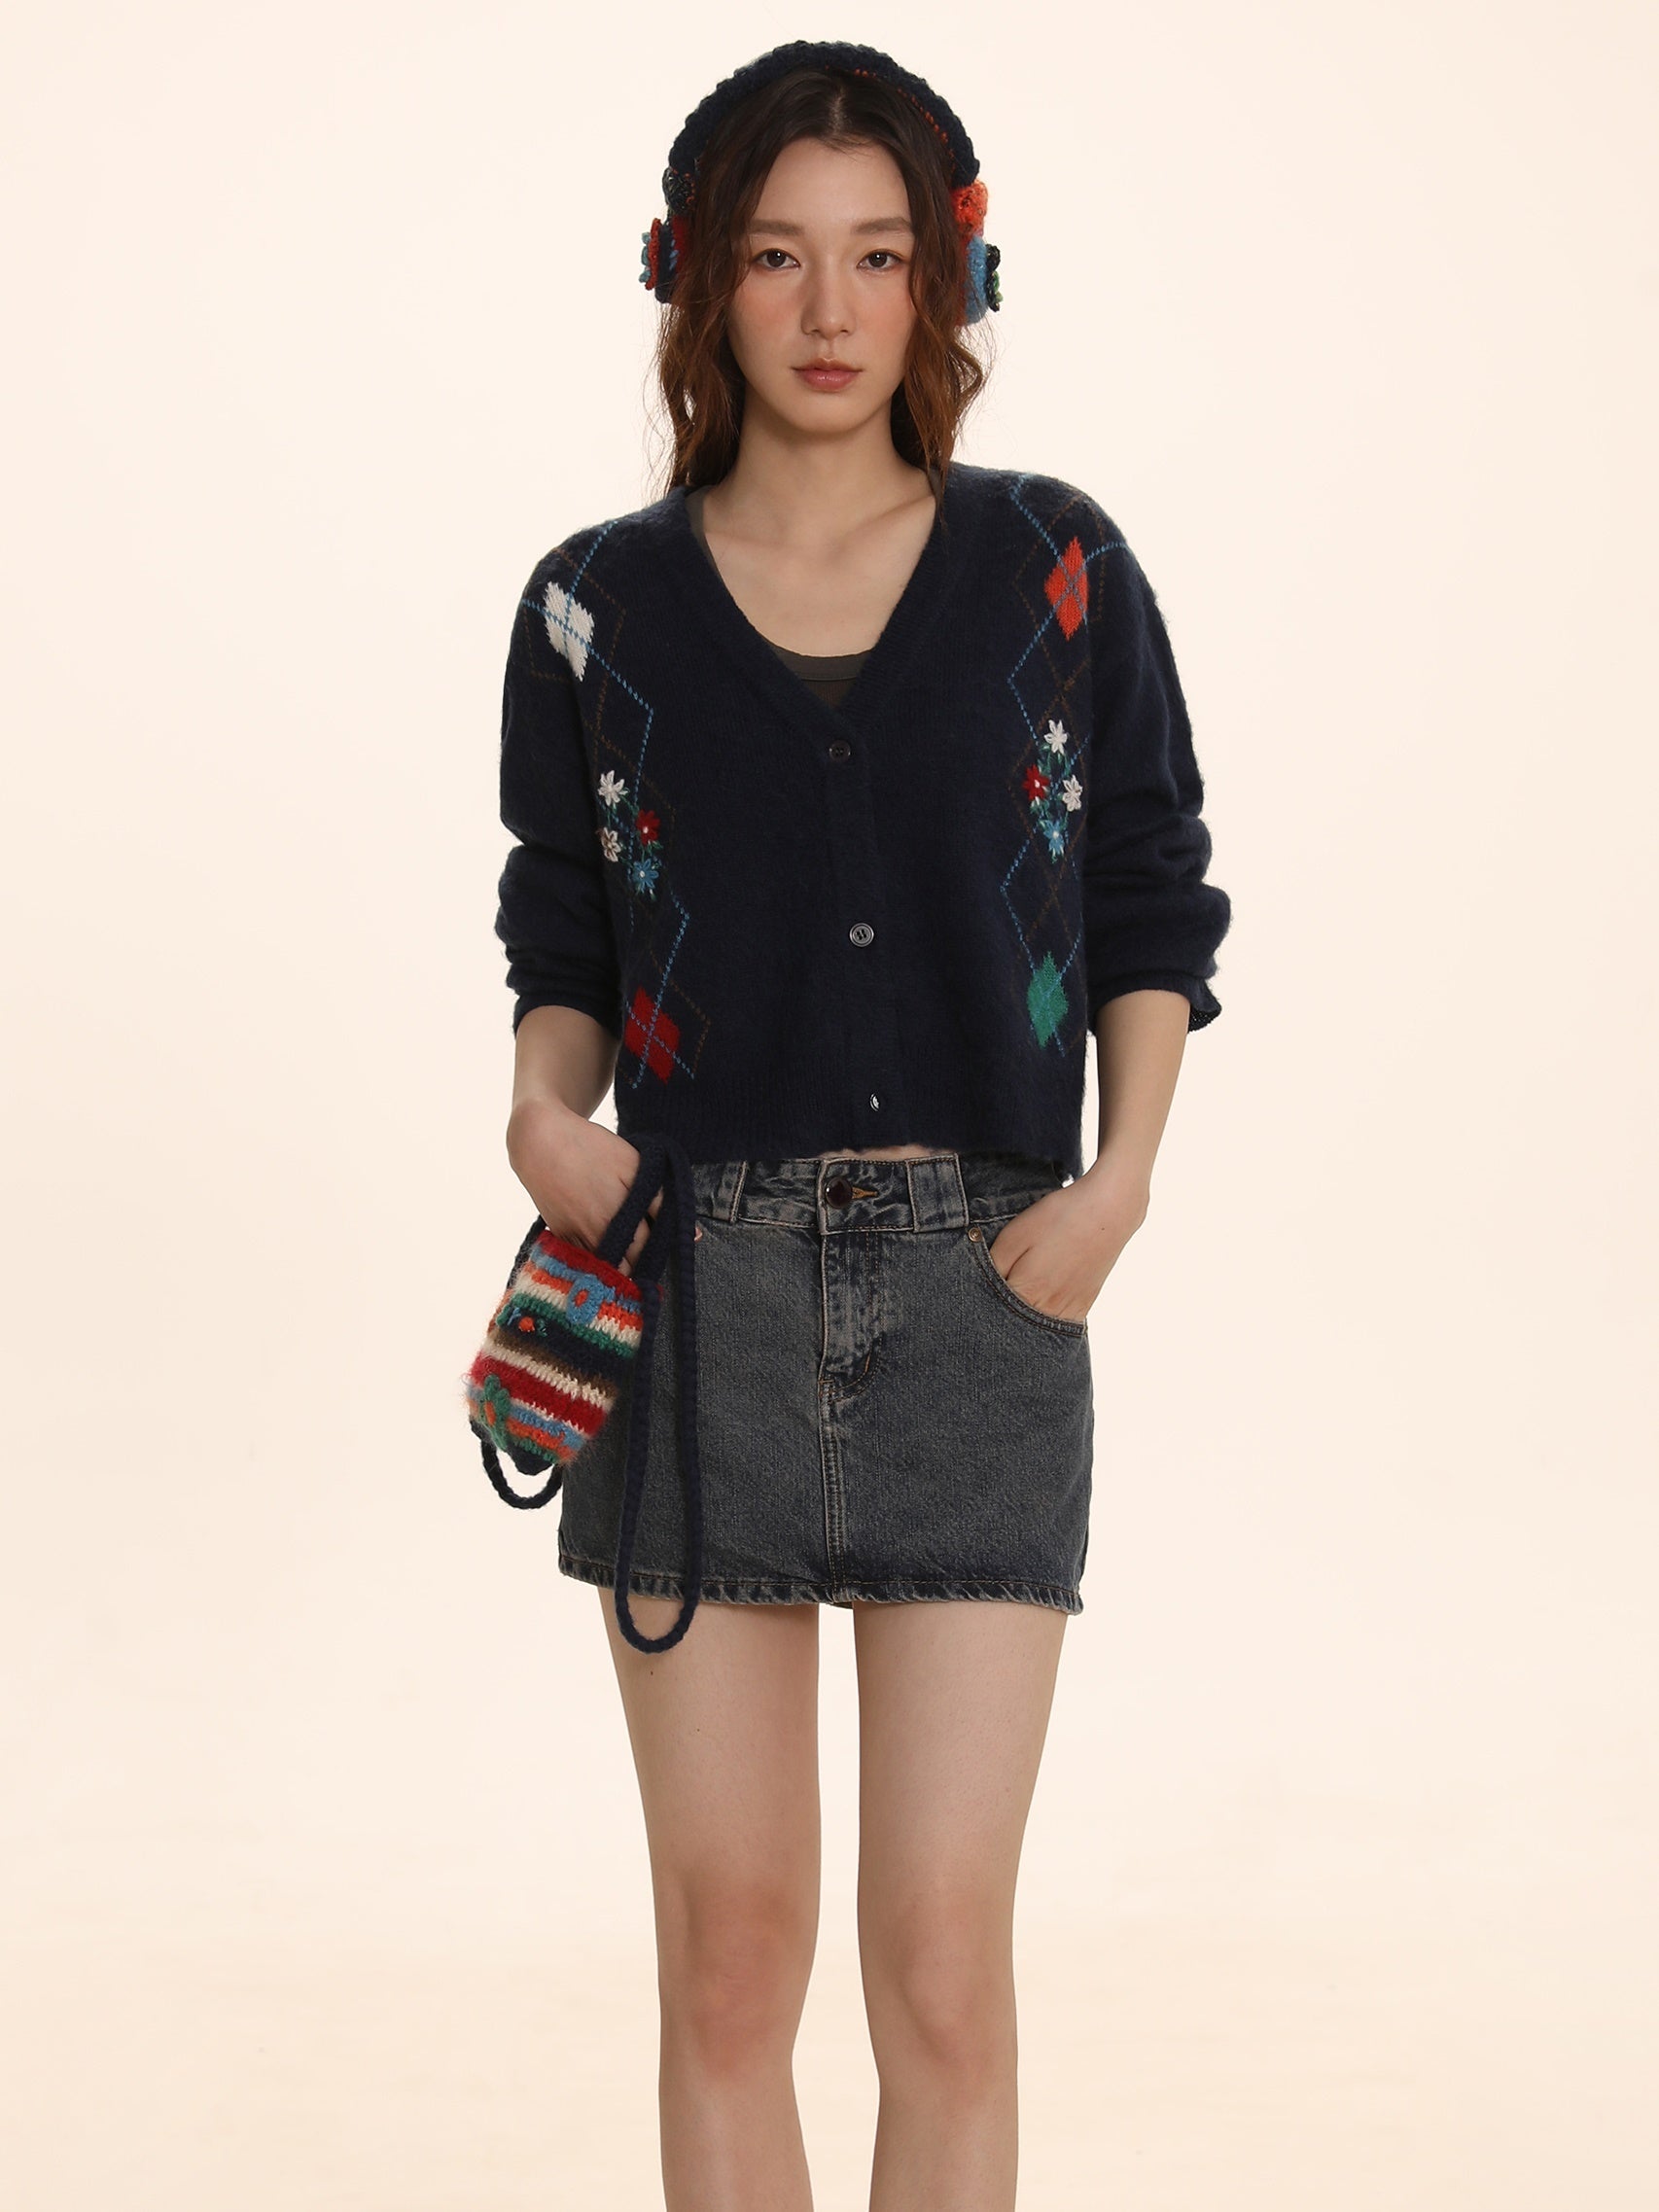 Embroidered Floral Knit Cardigan - chiclara